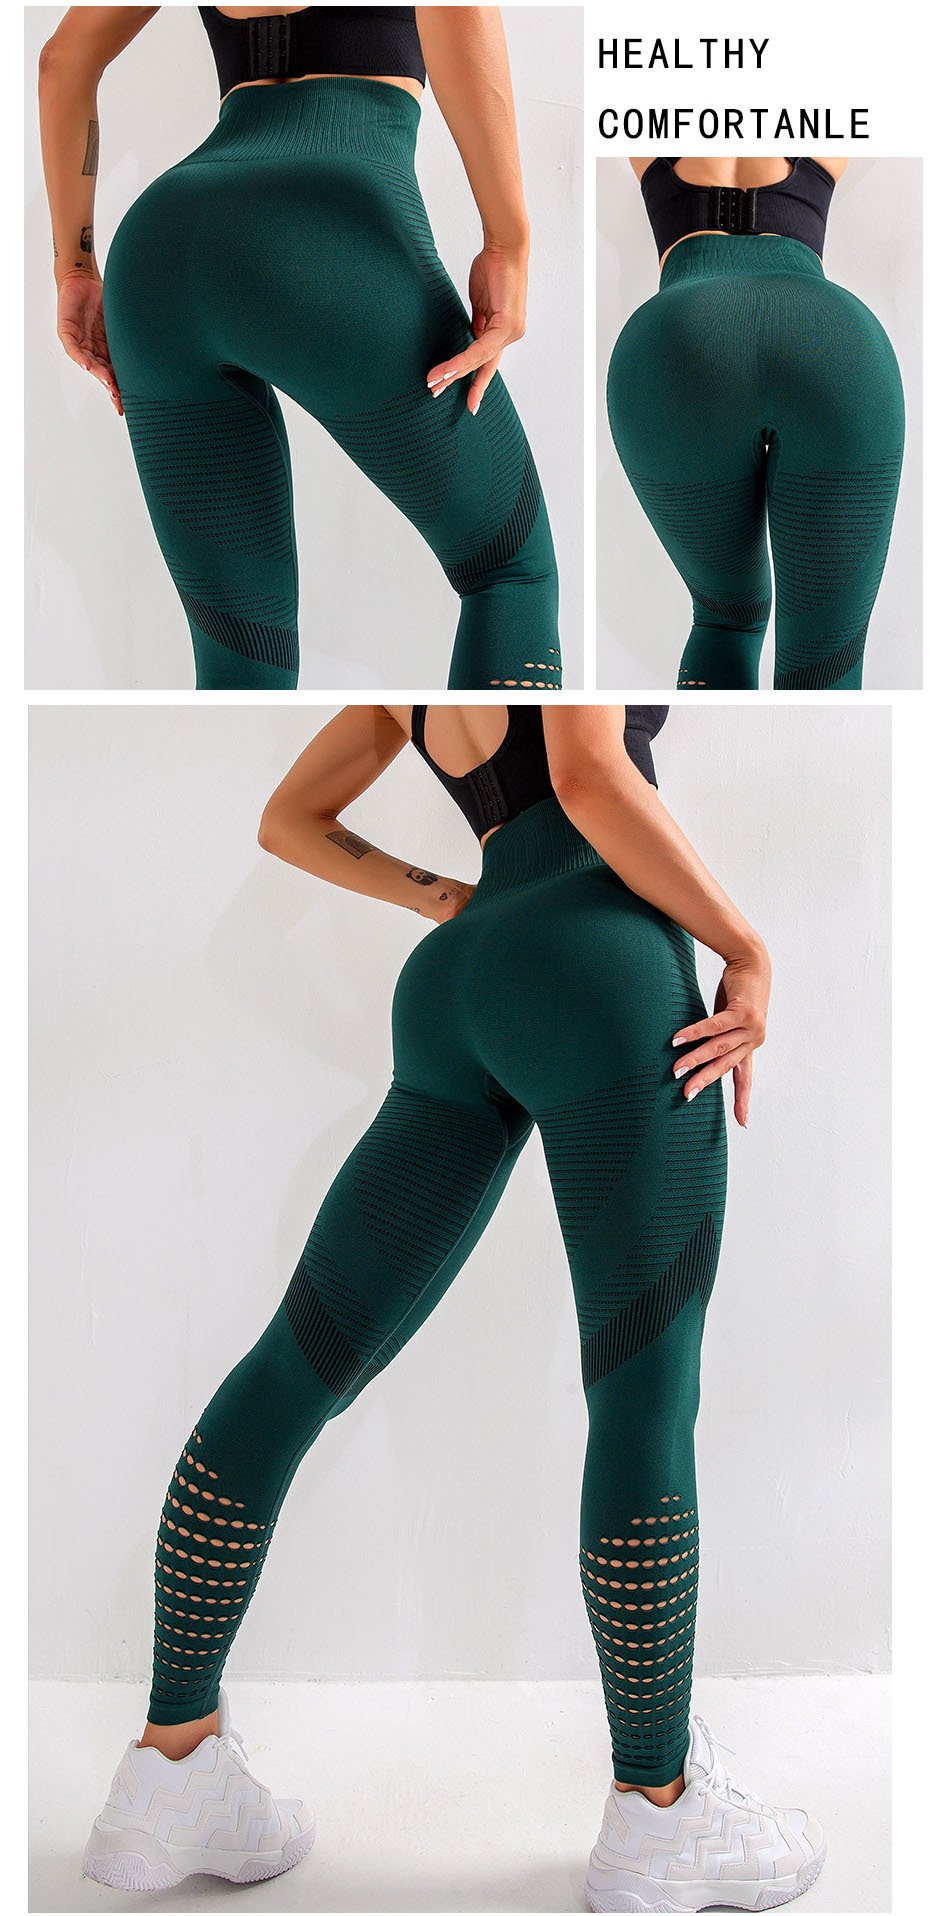 High Waist Seamless Leggings For Women Hollow out Gym legging Super Stretchy Fitness leggings Jogging Trousers